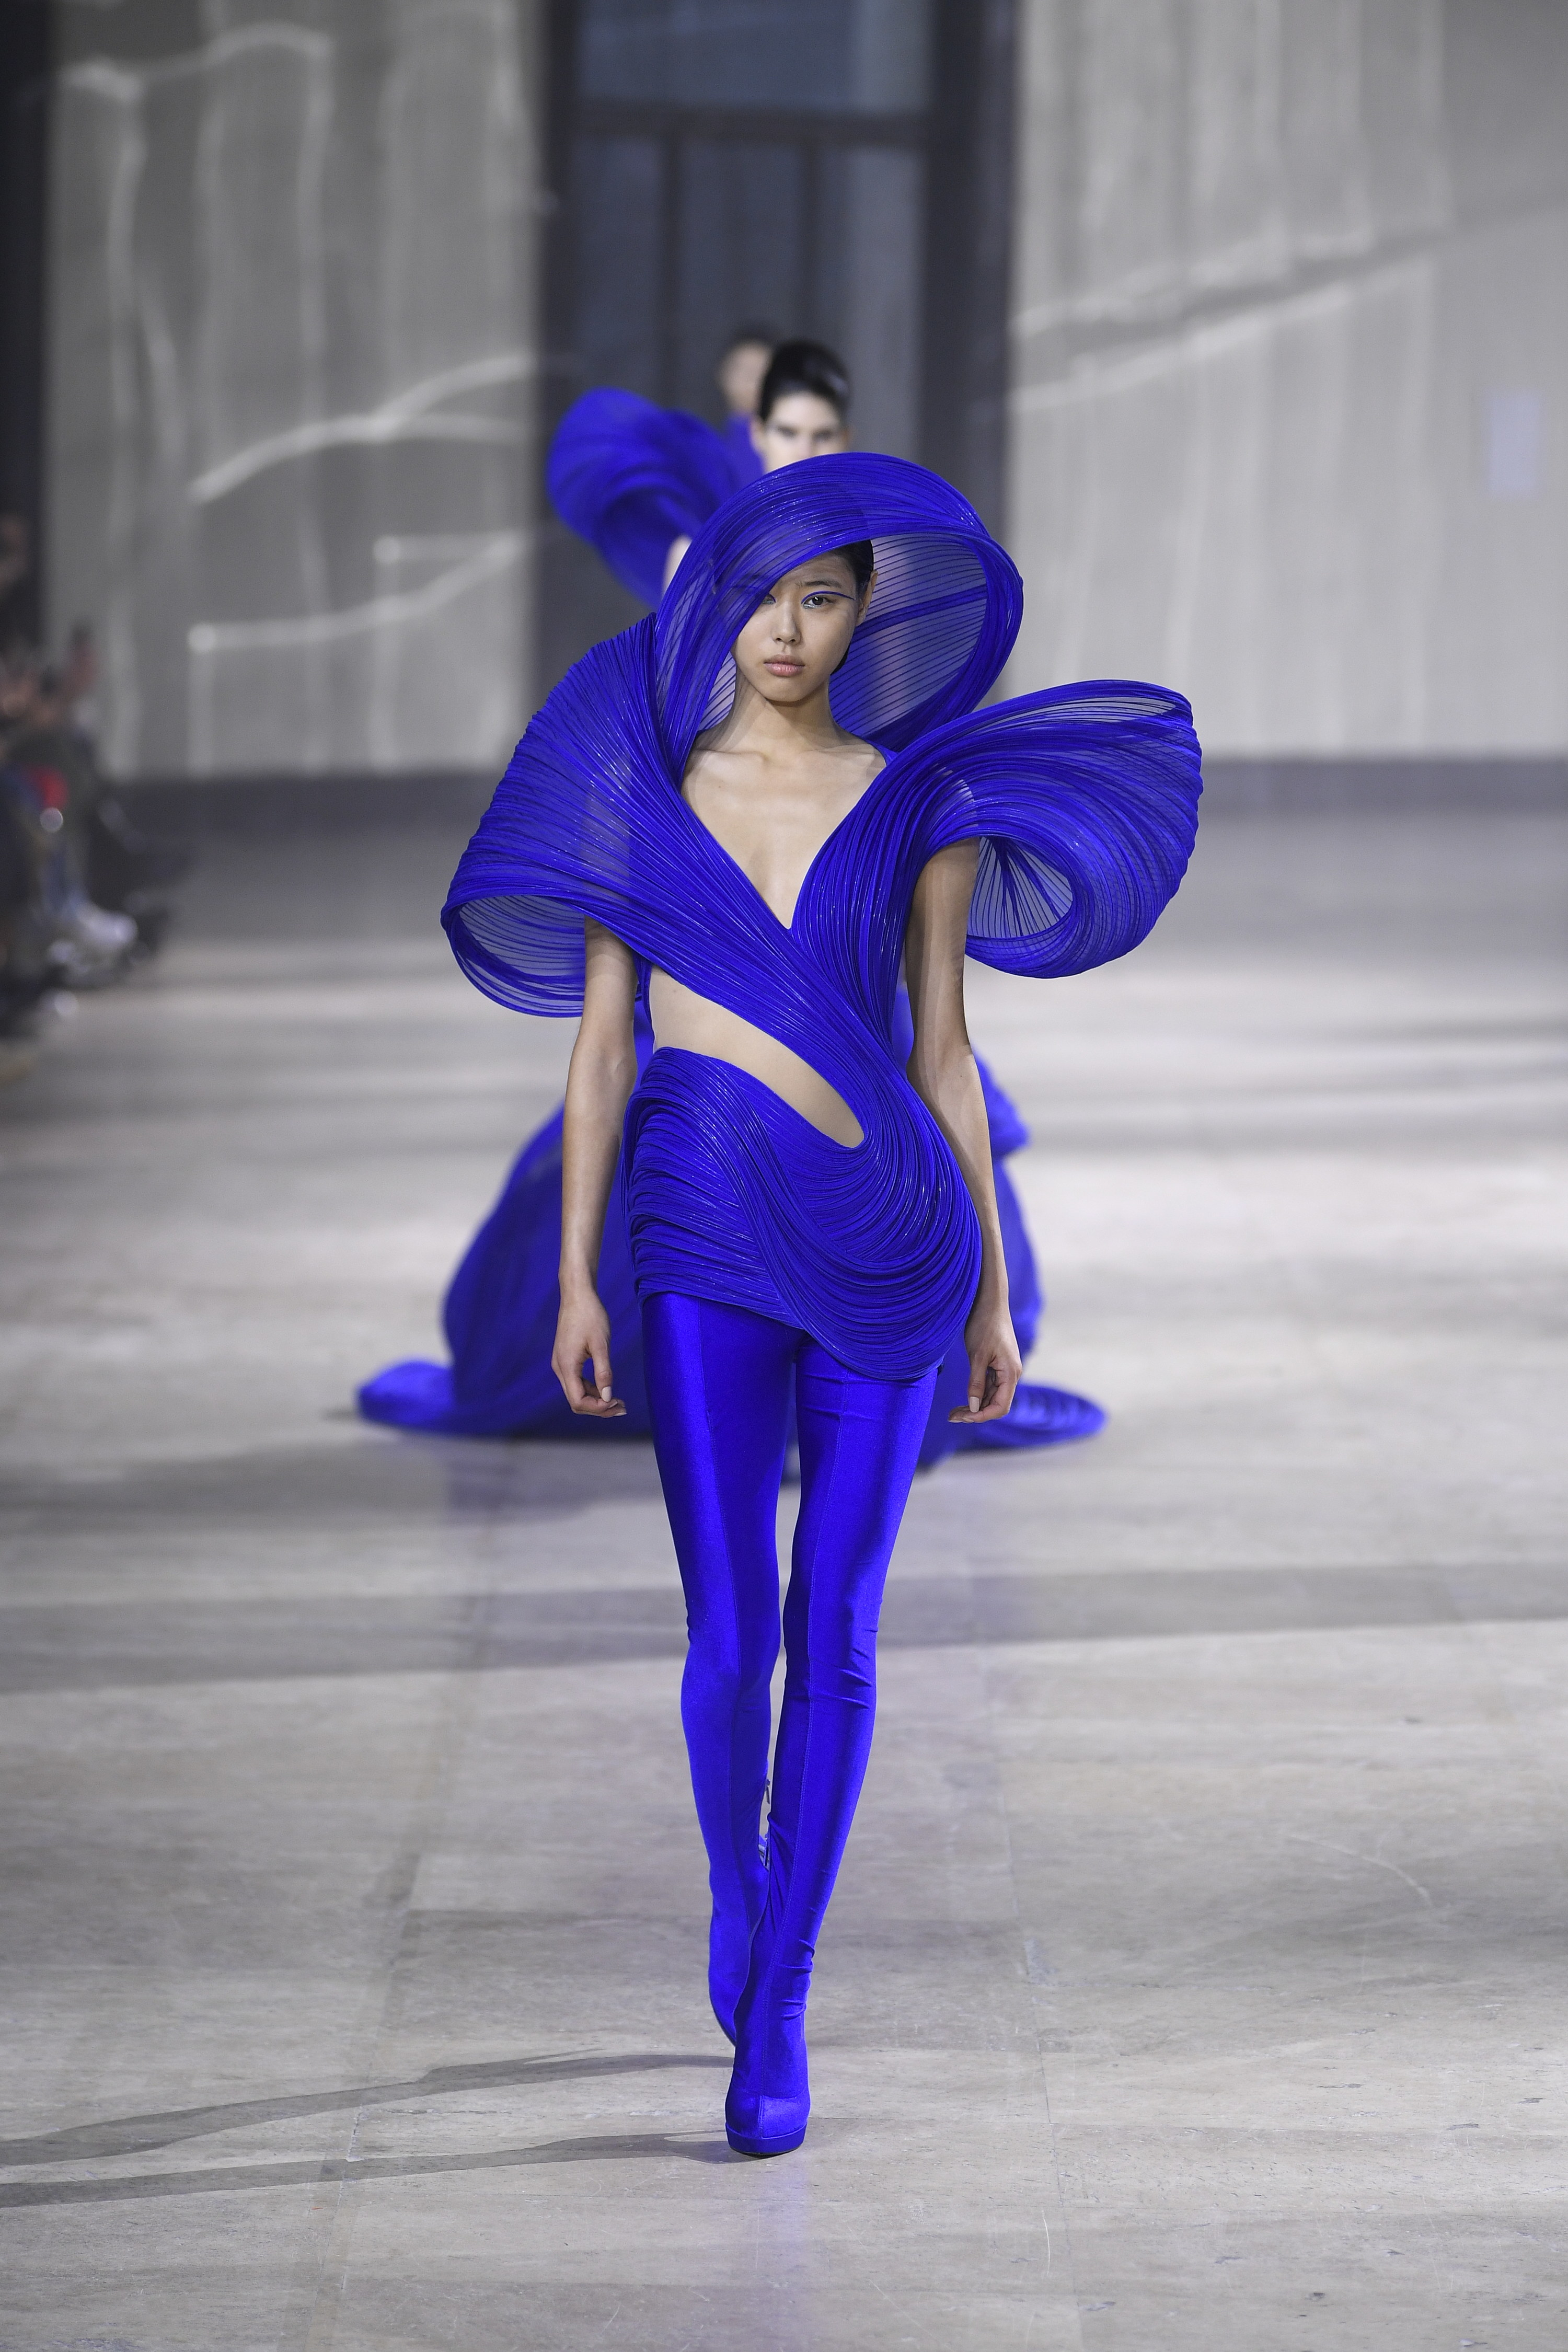 A model walking down the runway in the original piece which features a similar sculpted fabric that sits over the head. This outfit is a jumpsuit rather than a dress